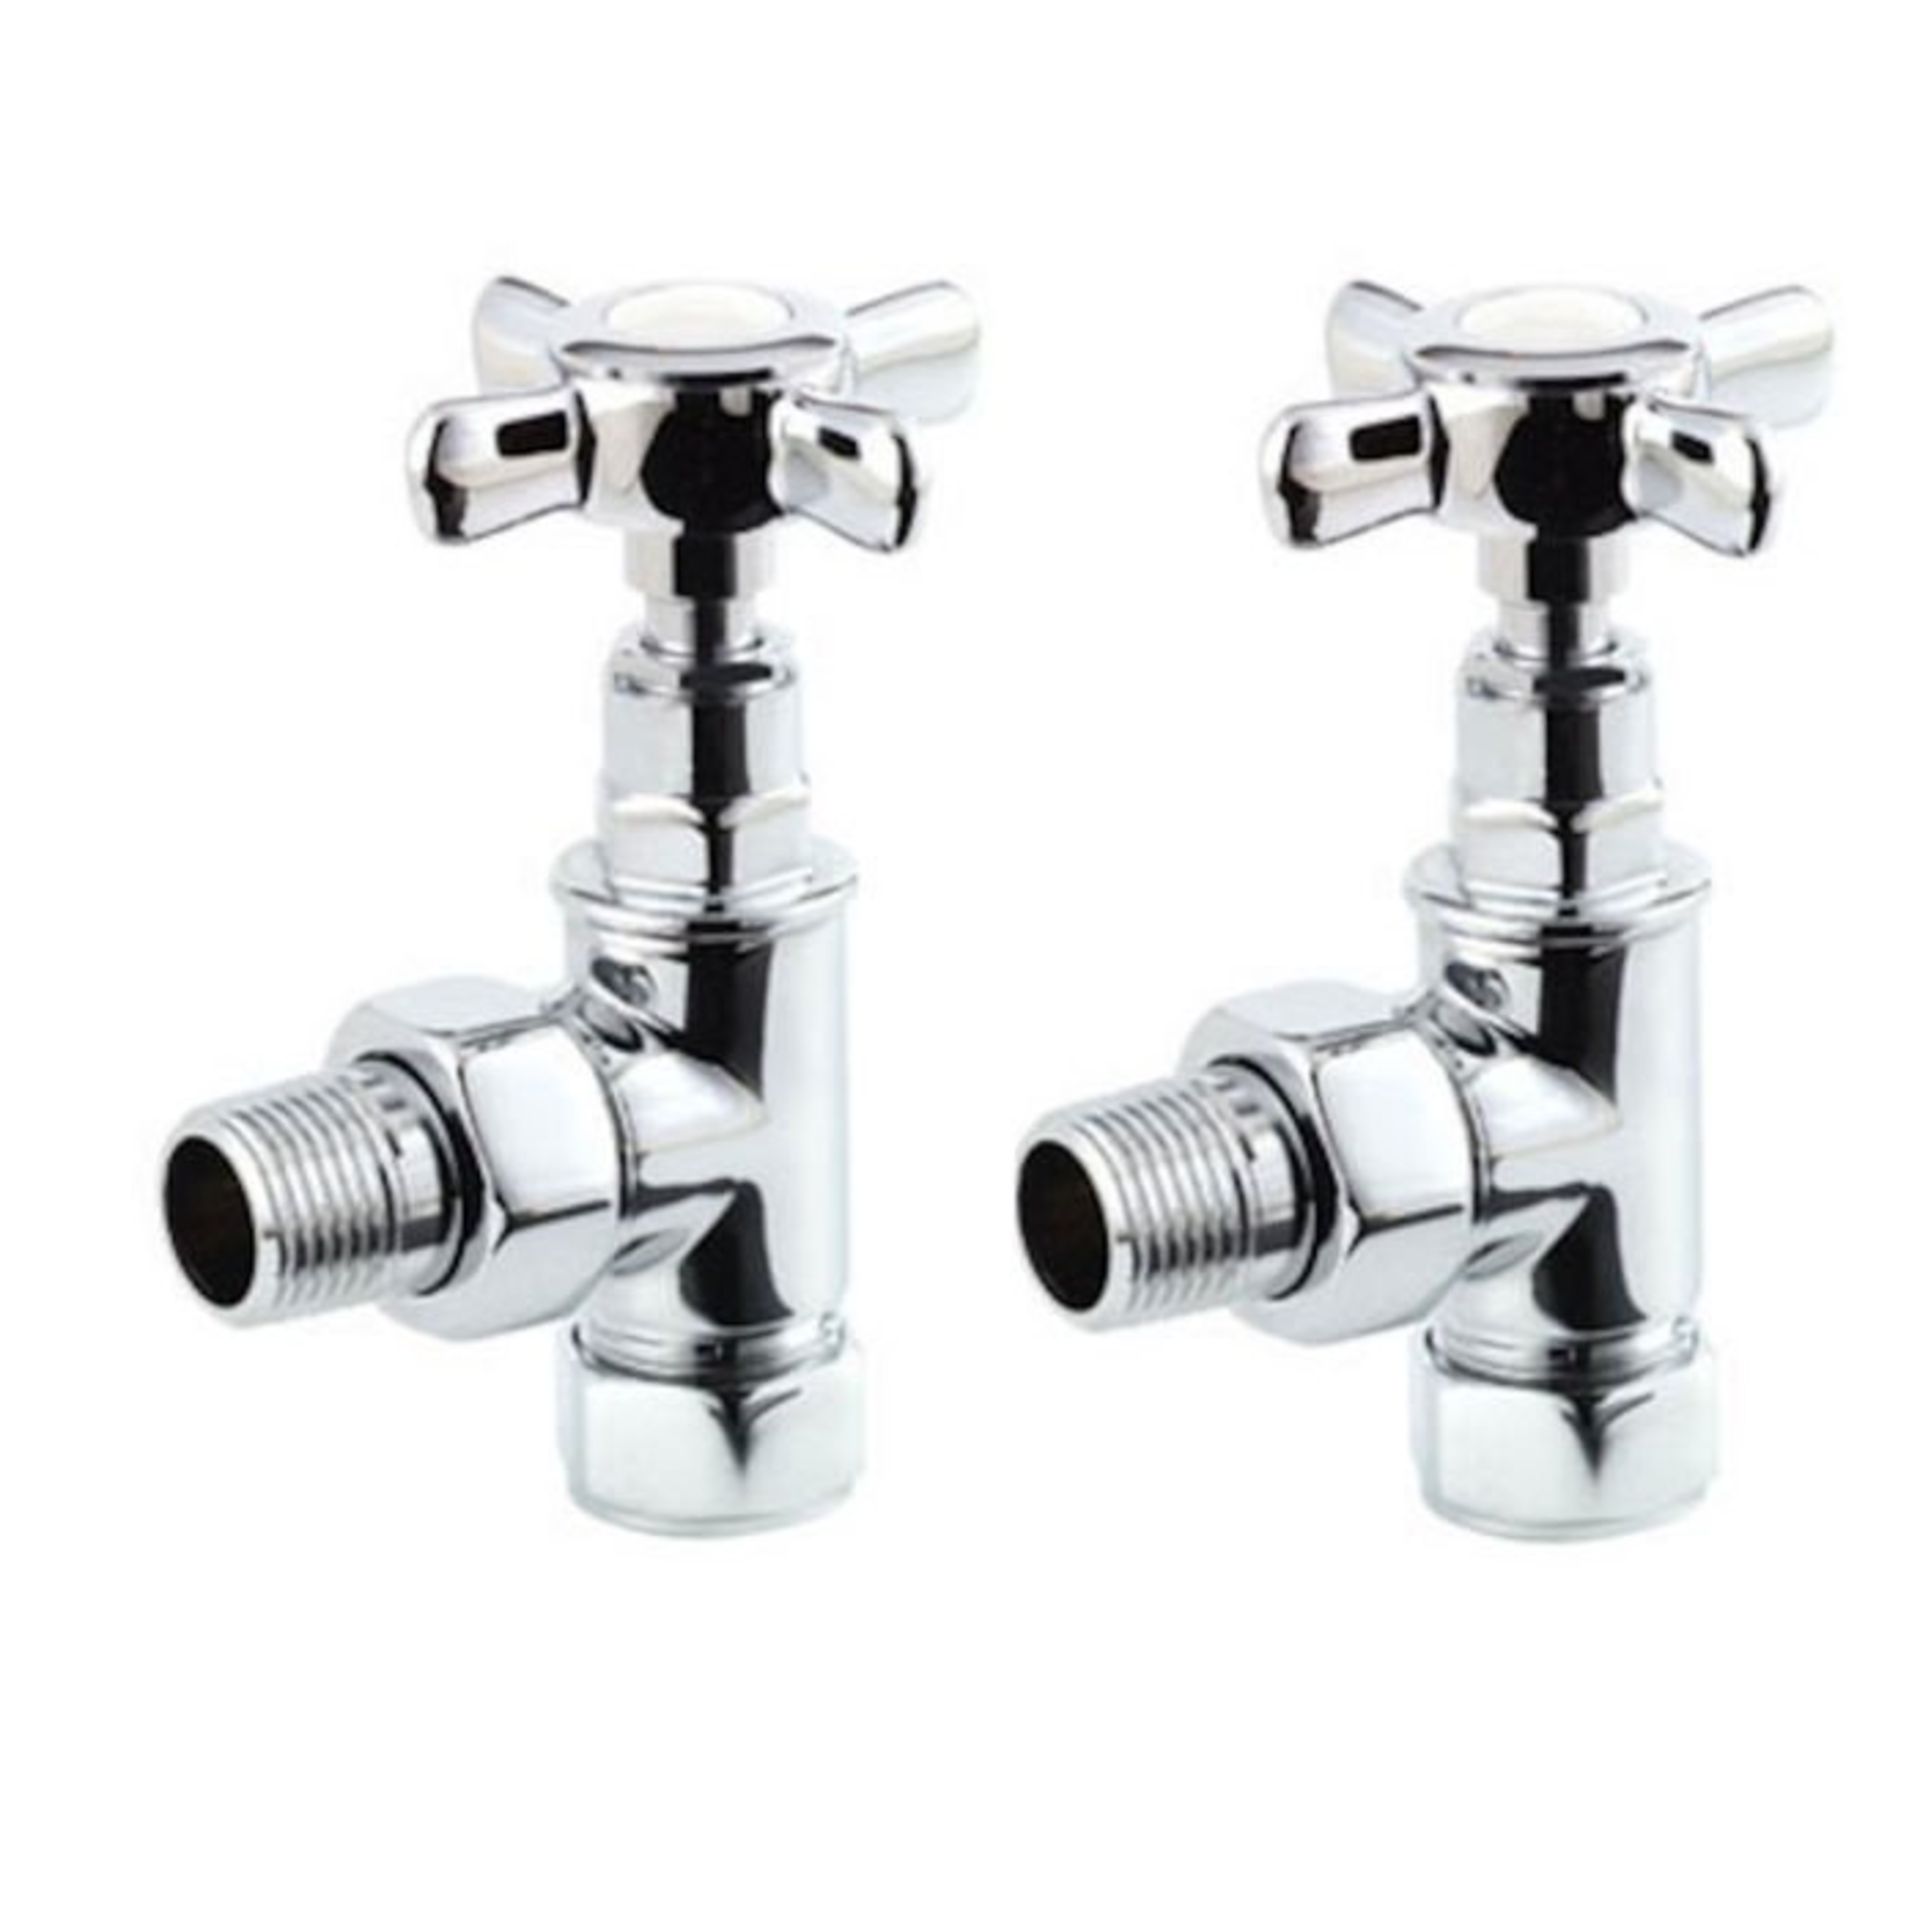 (L99) 5mm Standard Connection Angled Polished Chrome Radiator Valves. Chrome Plated Solid Brass